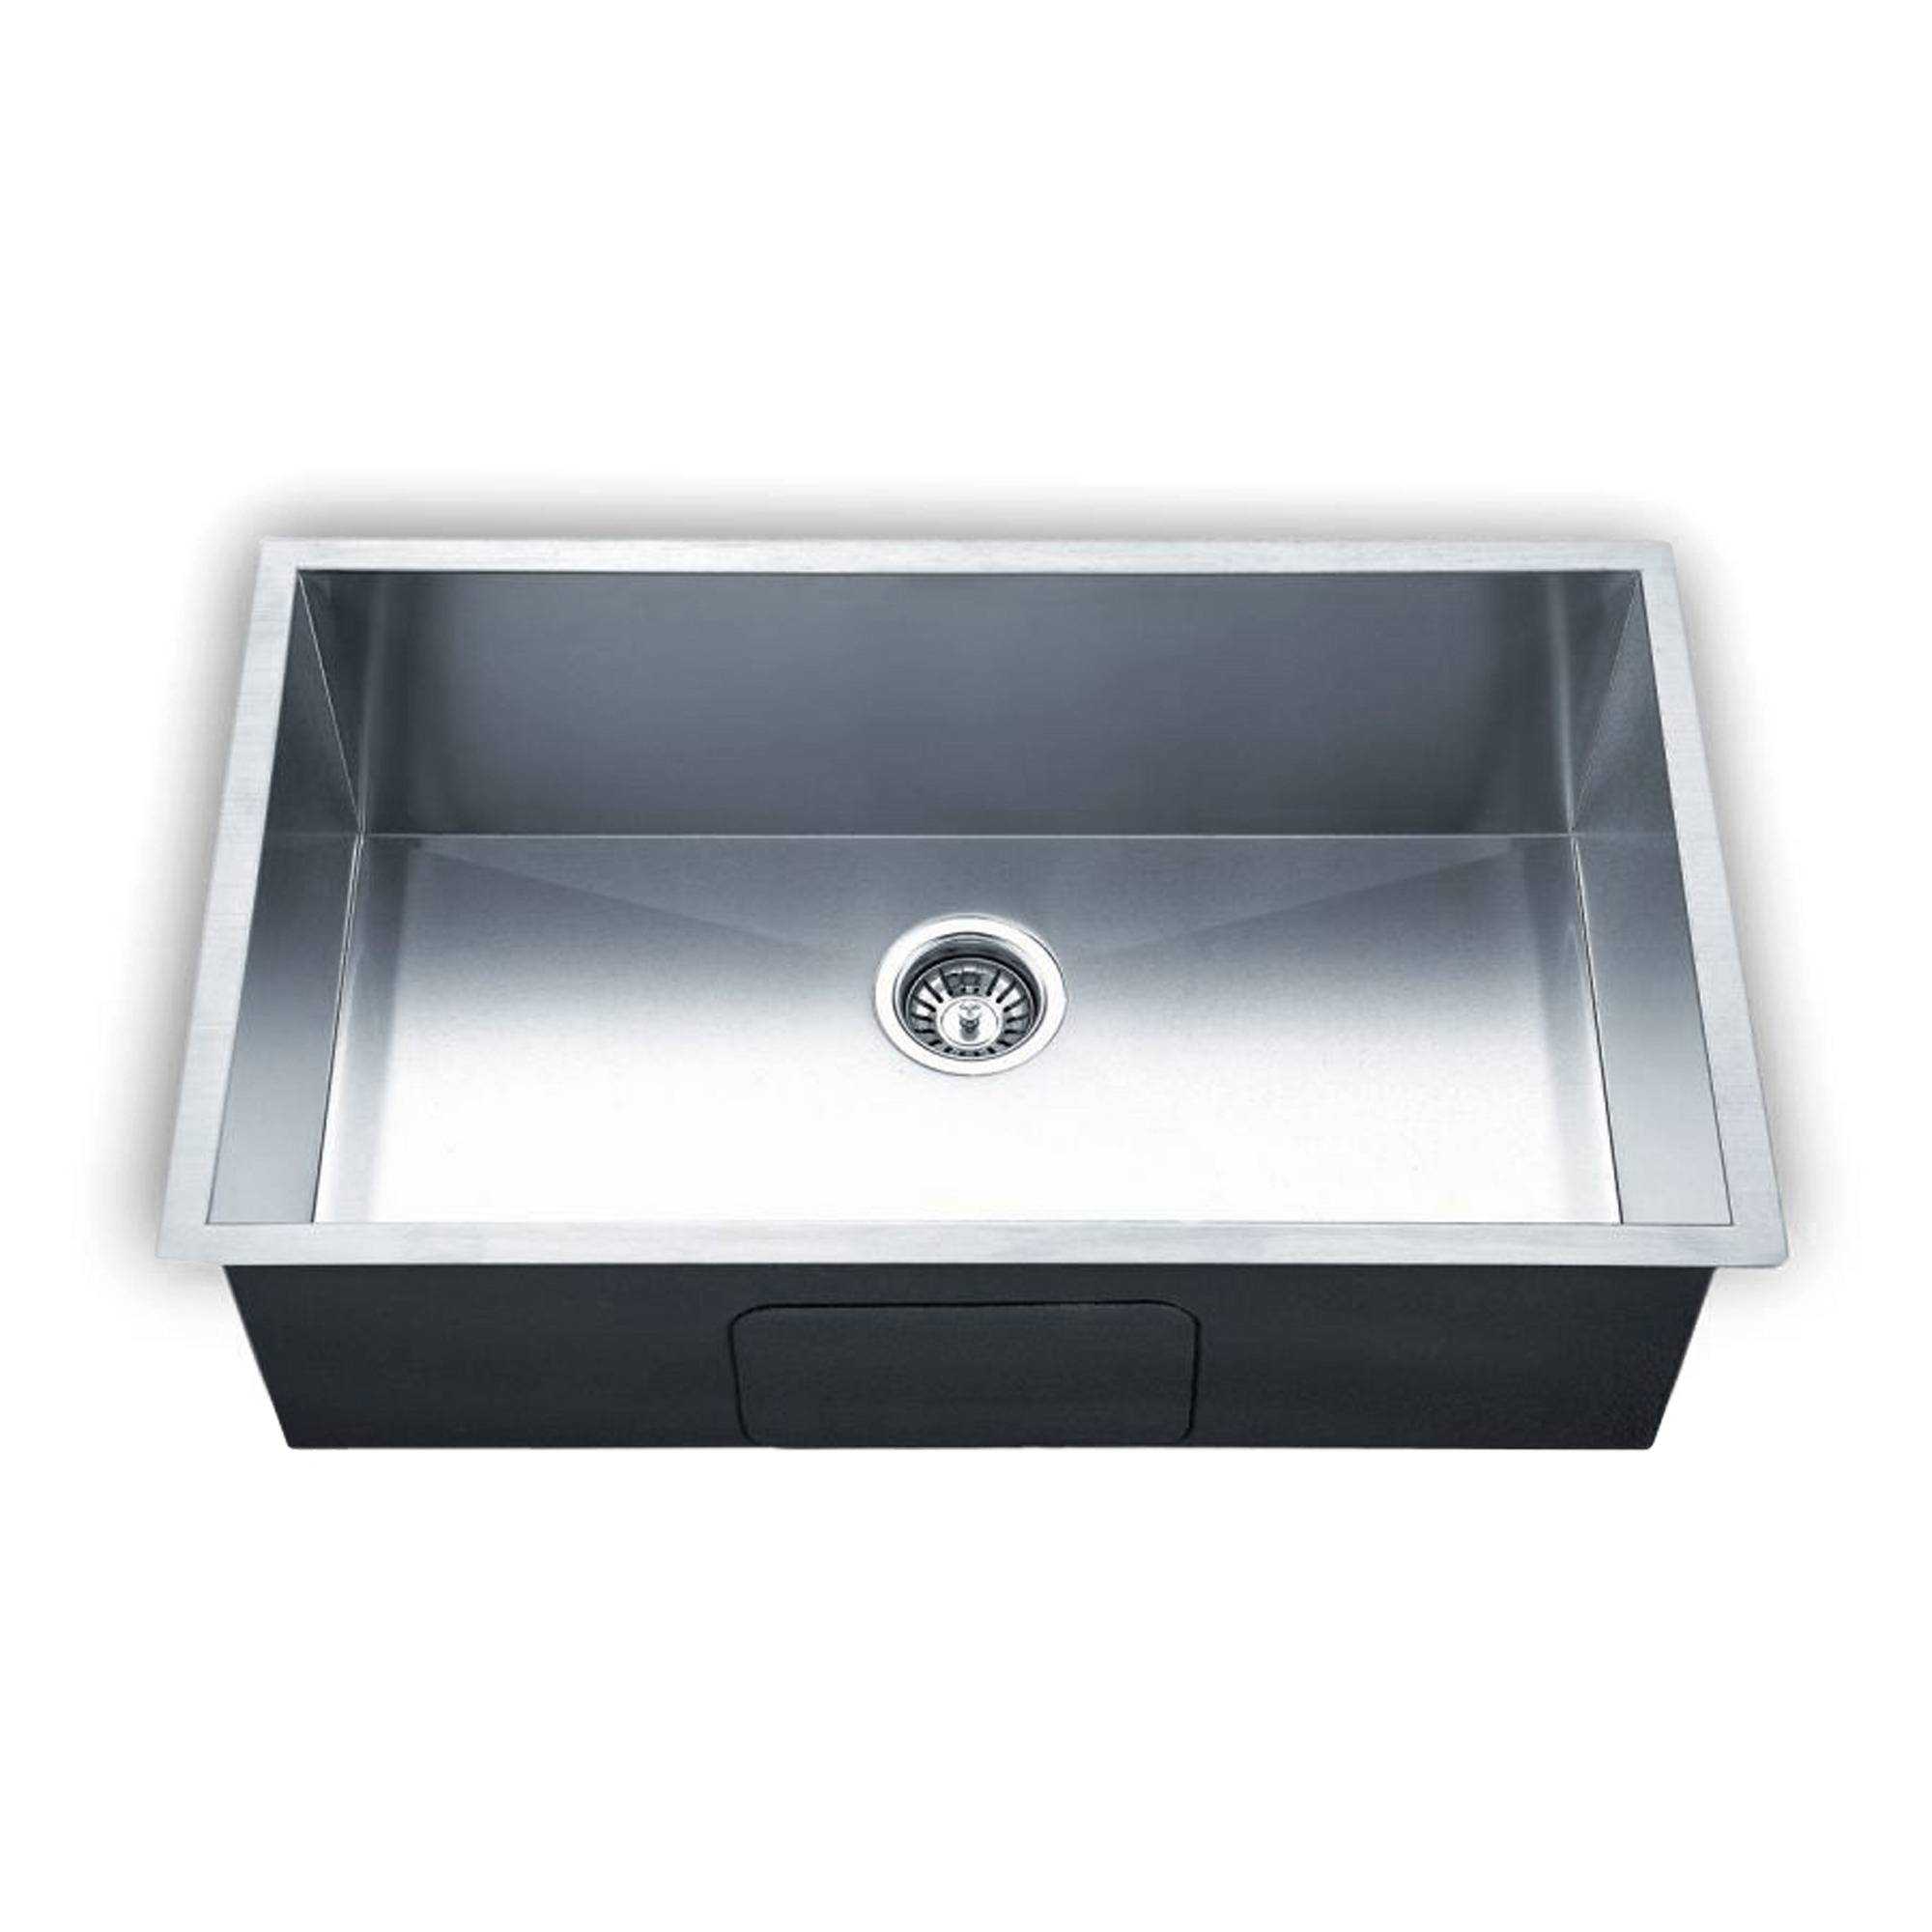 A seamless, contemporary, stainless steel single kitchen single sink for under mount application.